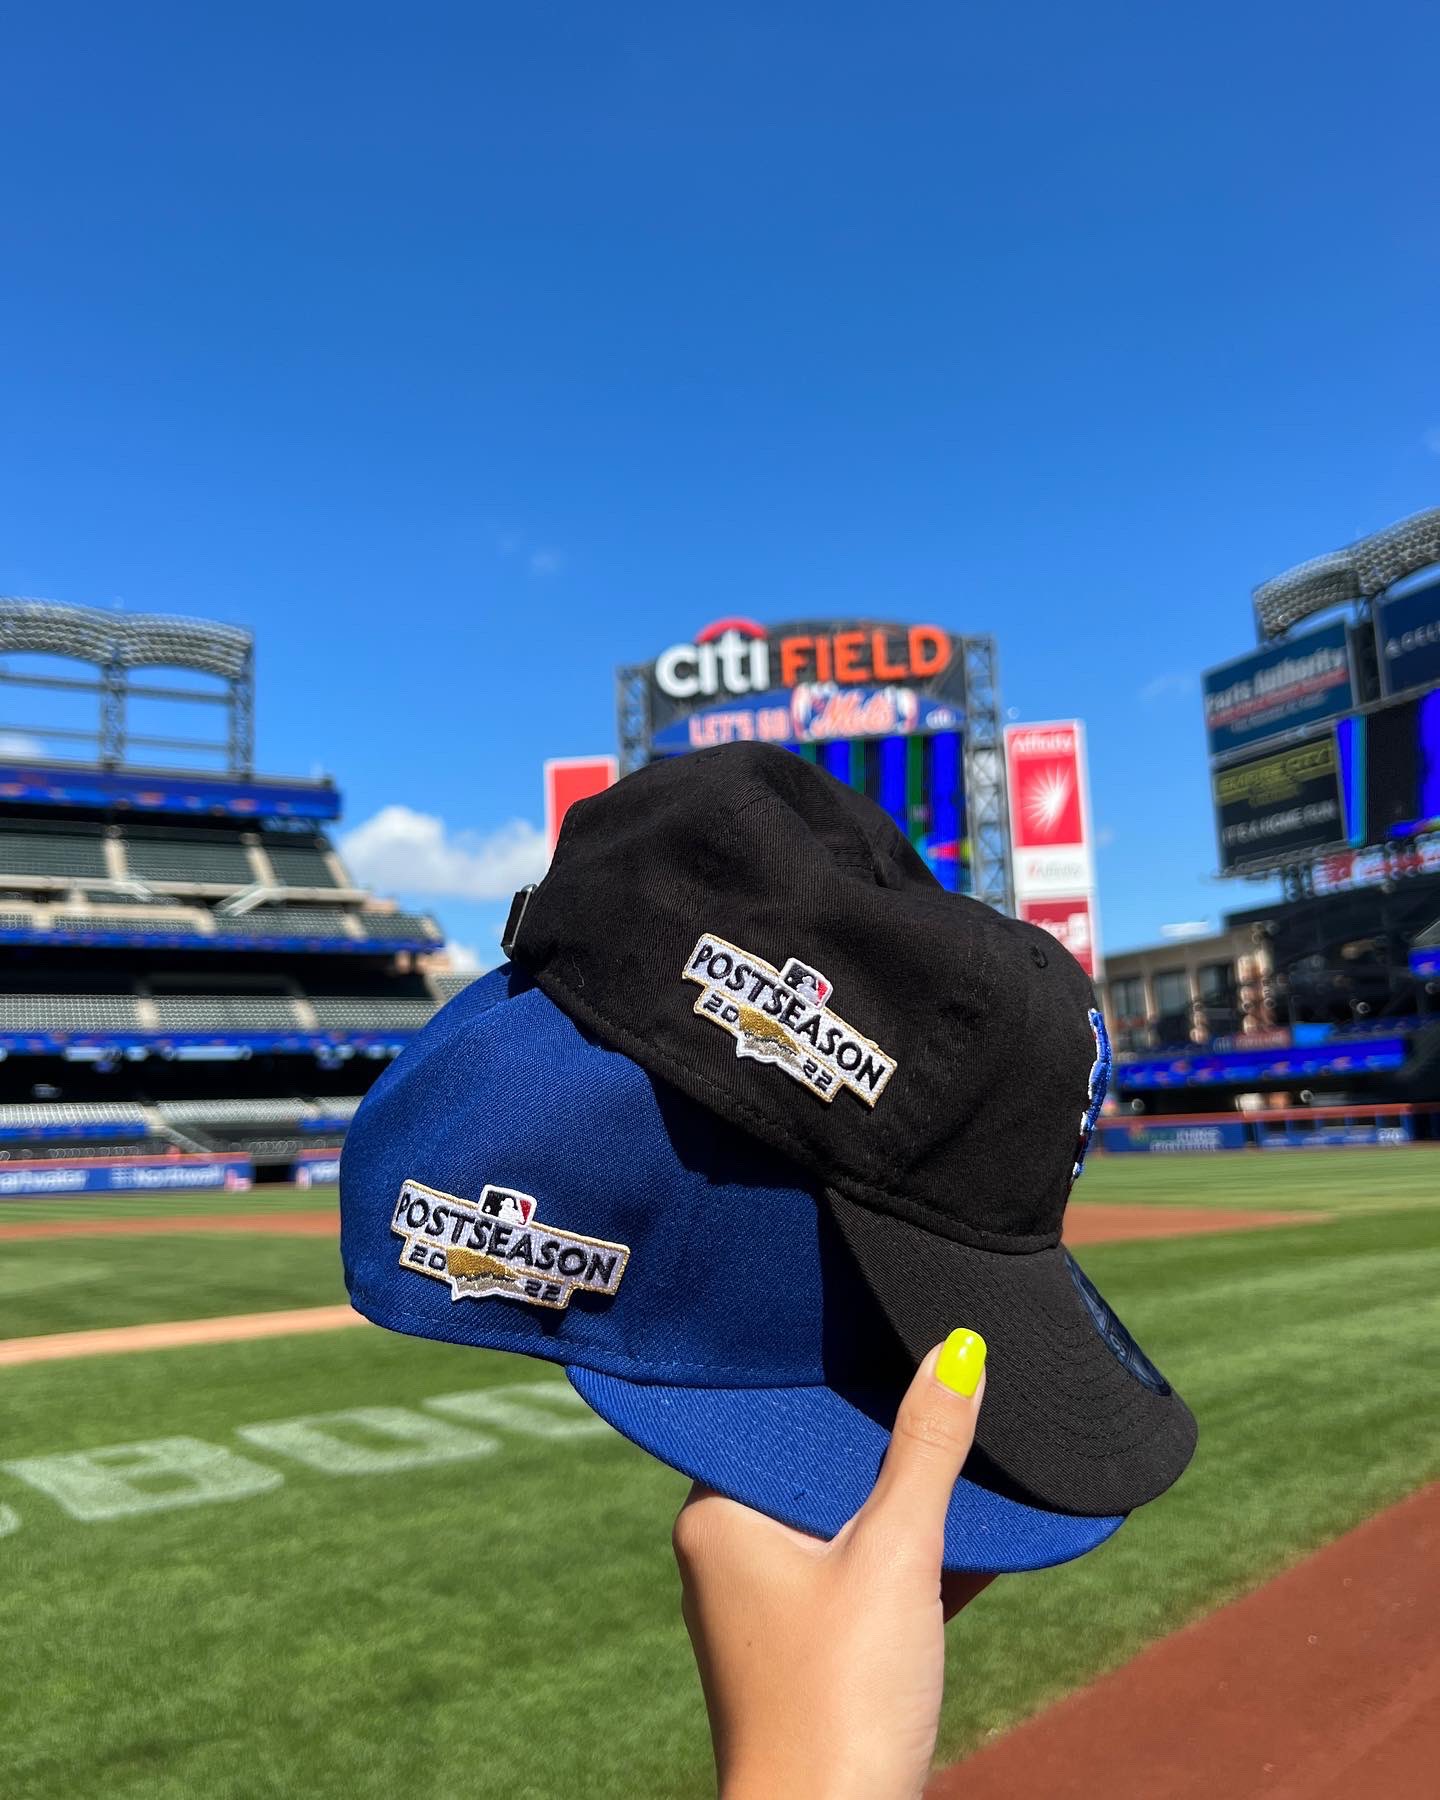 Mets Team Store on X: #Postseason merch is starting to arrive! Shop the @ Mets Team Store today through Thursday from 10AM-5PM. #Mets #teamstore  #CitiField #LGM #NYM  / X